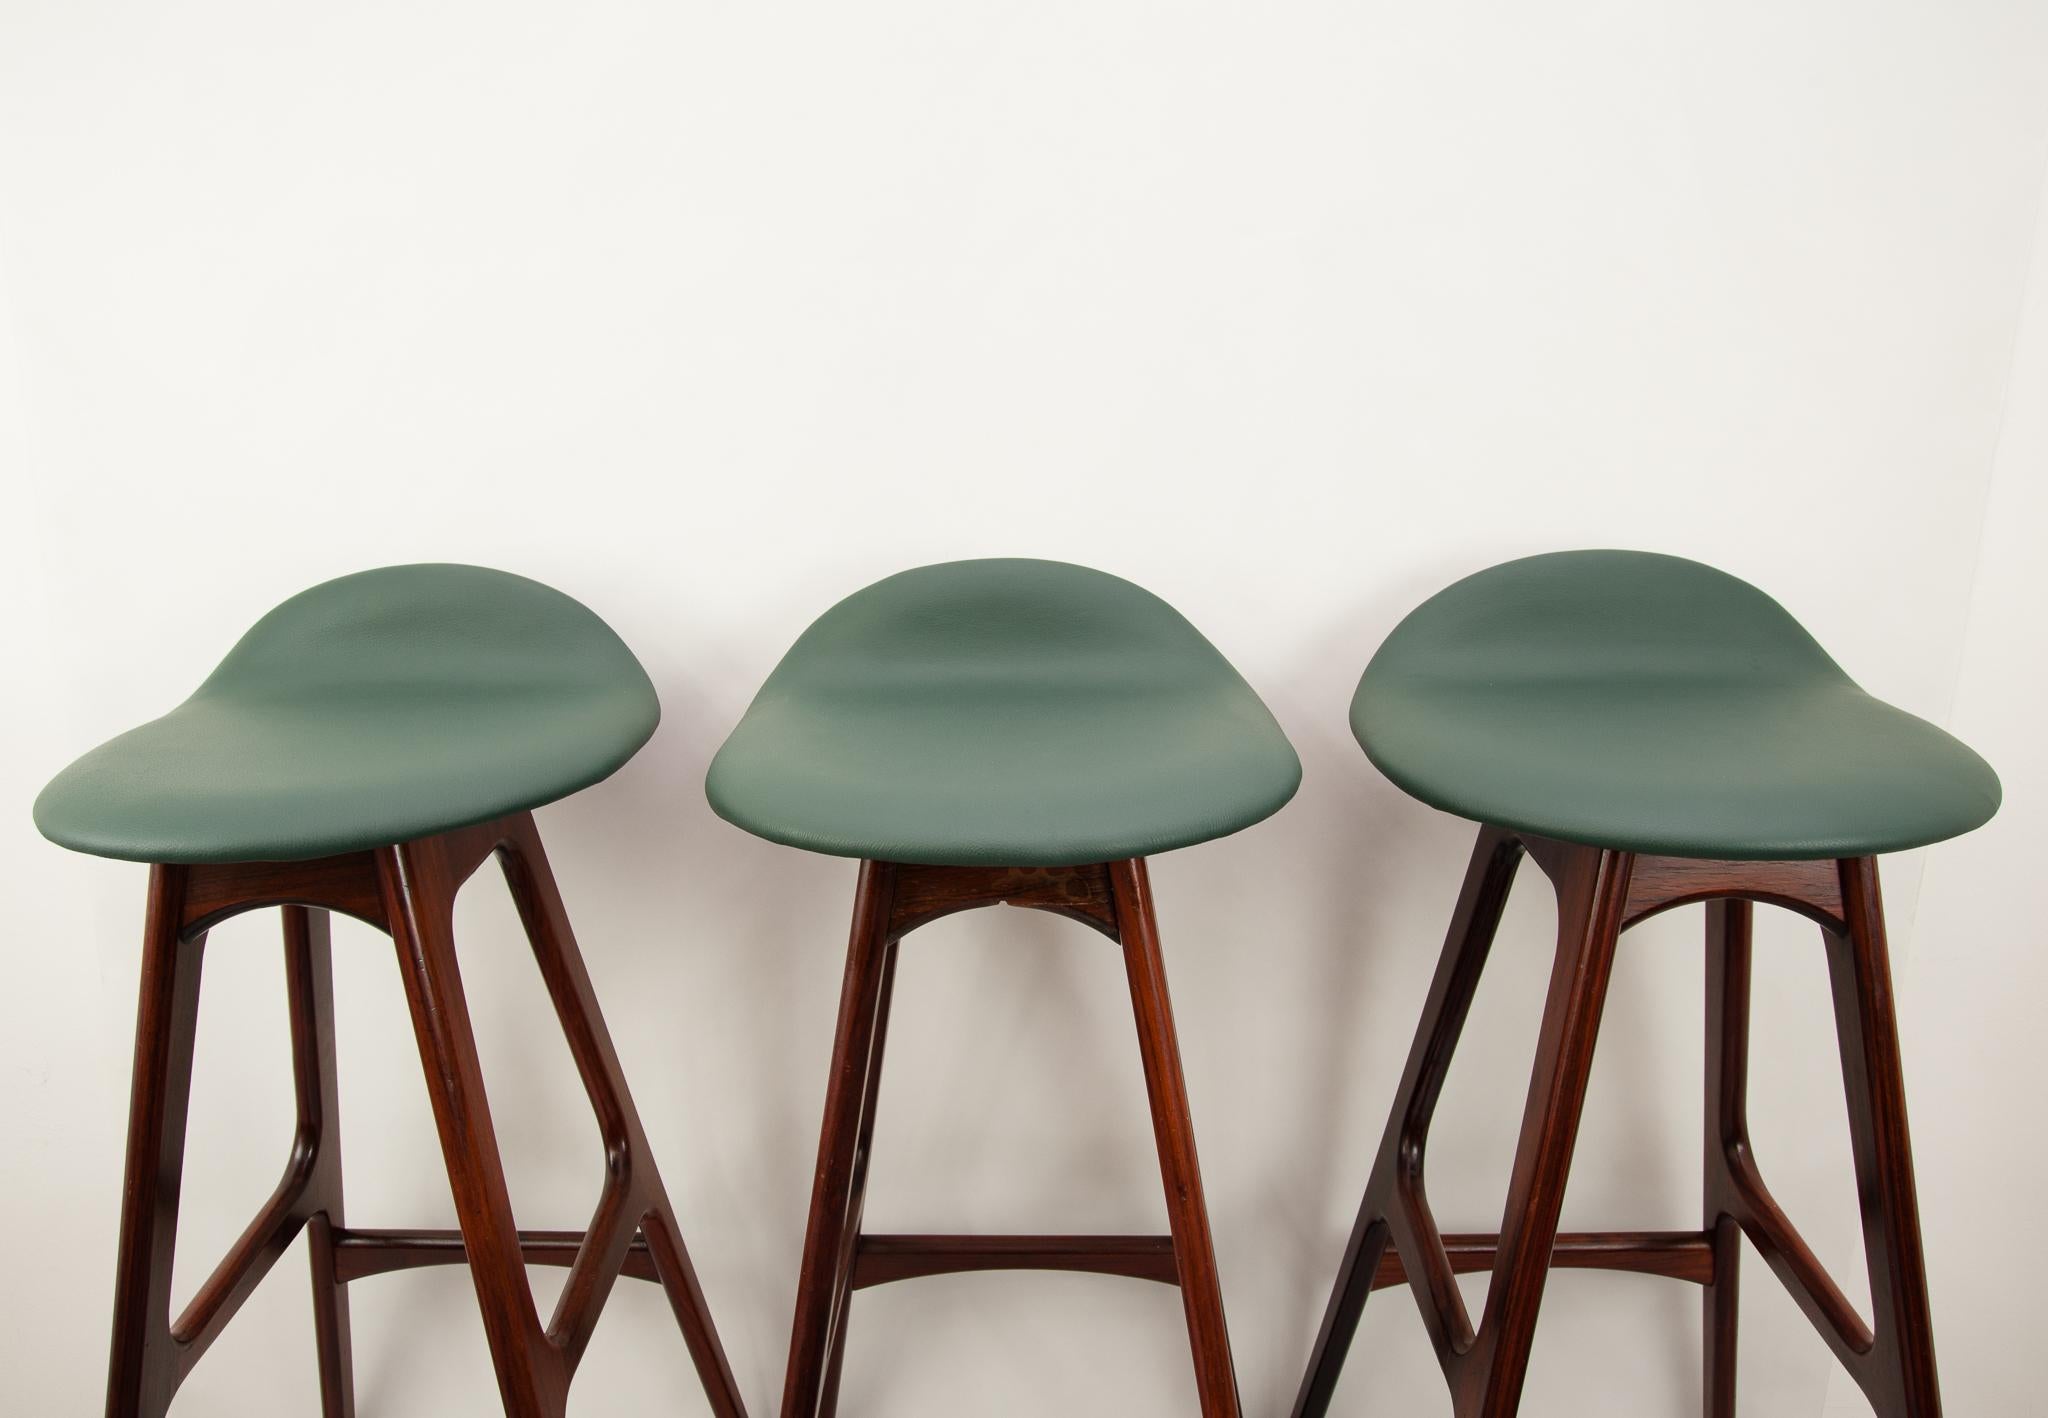 Rosewood bar stools OD 61 by Erik Buch for Oddense Maskinsnedkeri, 1960s
The leather on top is made new.
The wood is slightly refreshed.
    